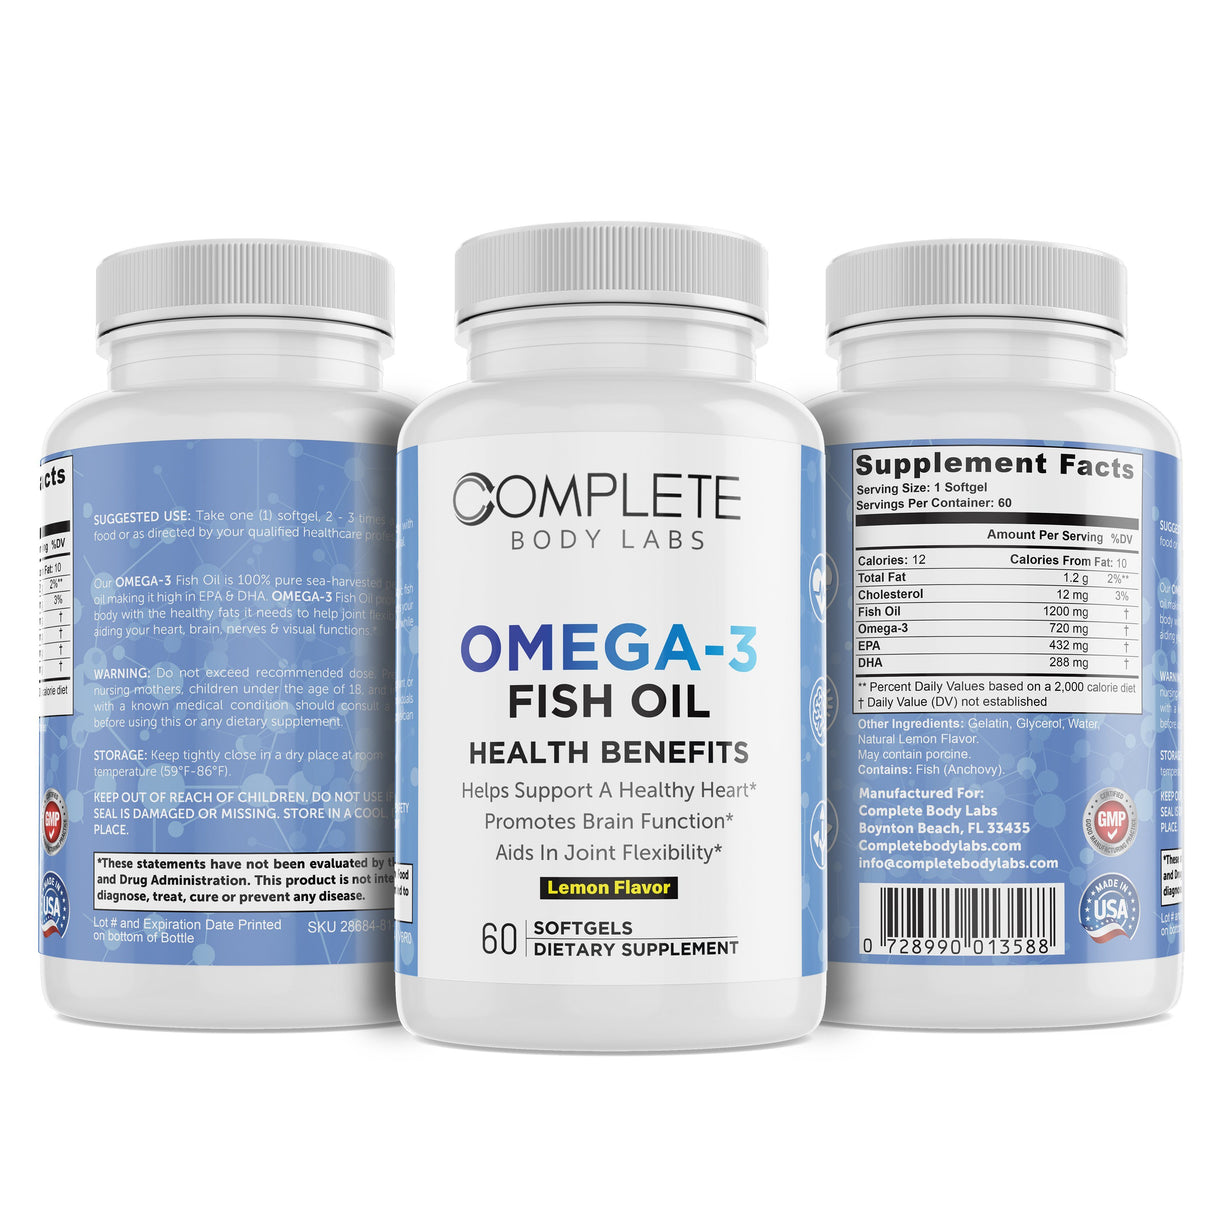 OMEGA-3 Fish Oil Complete Body Labs 